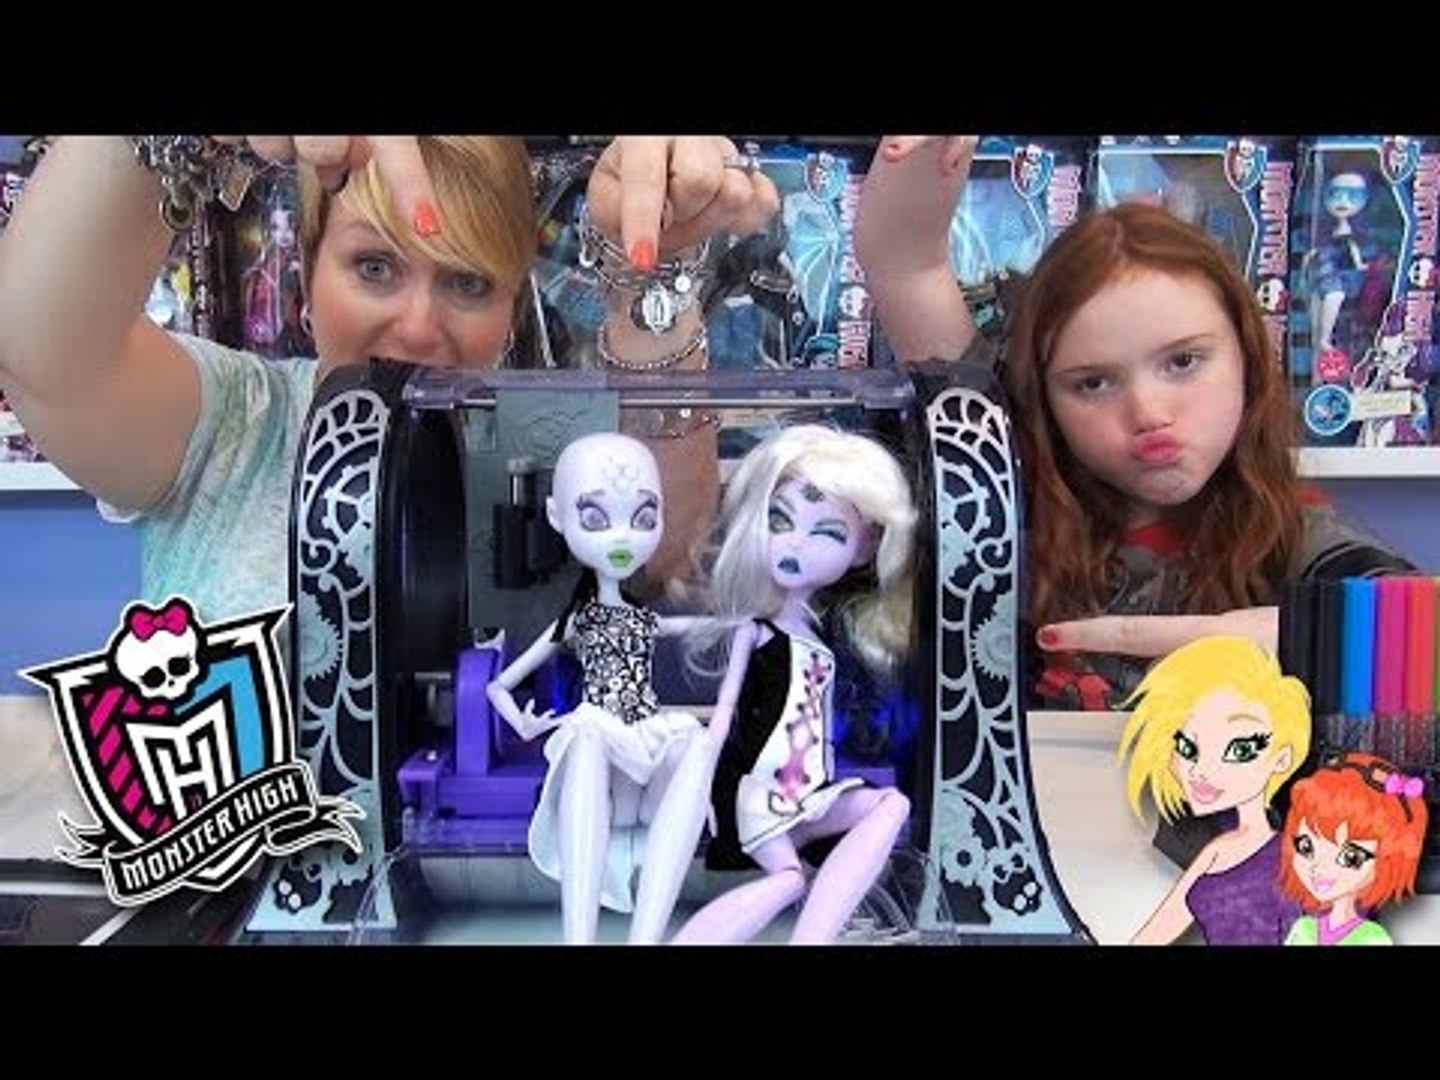 Monster High Monster Maker Printer Review and Demo - video Dailymotion